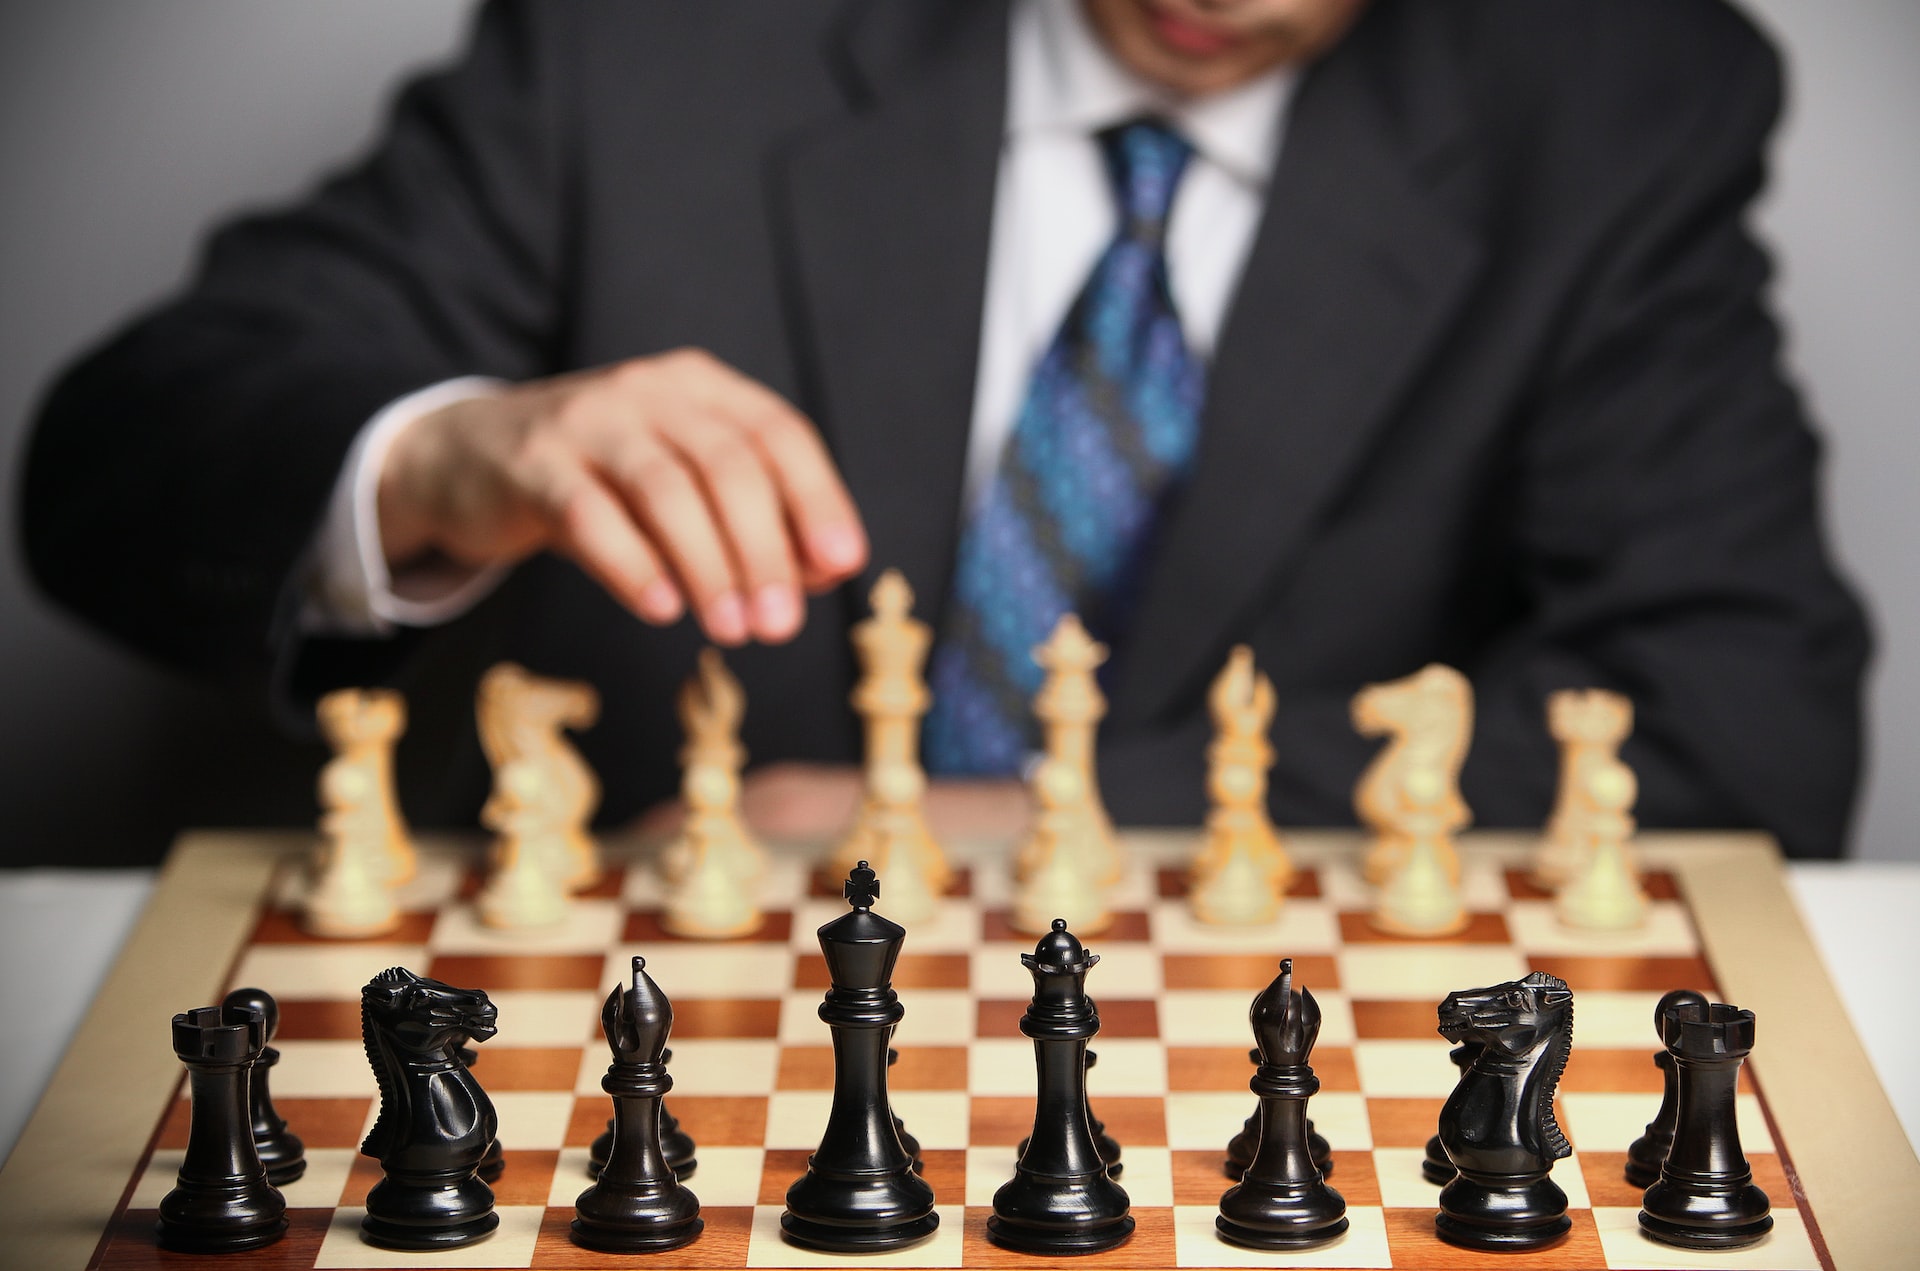 What do you need to start playing chess professionally?